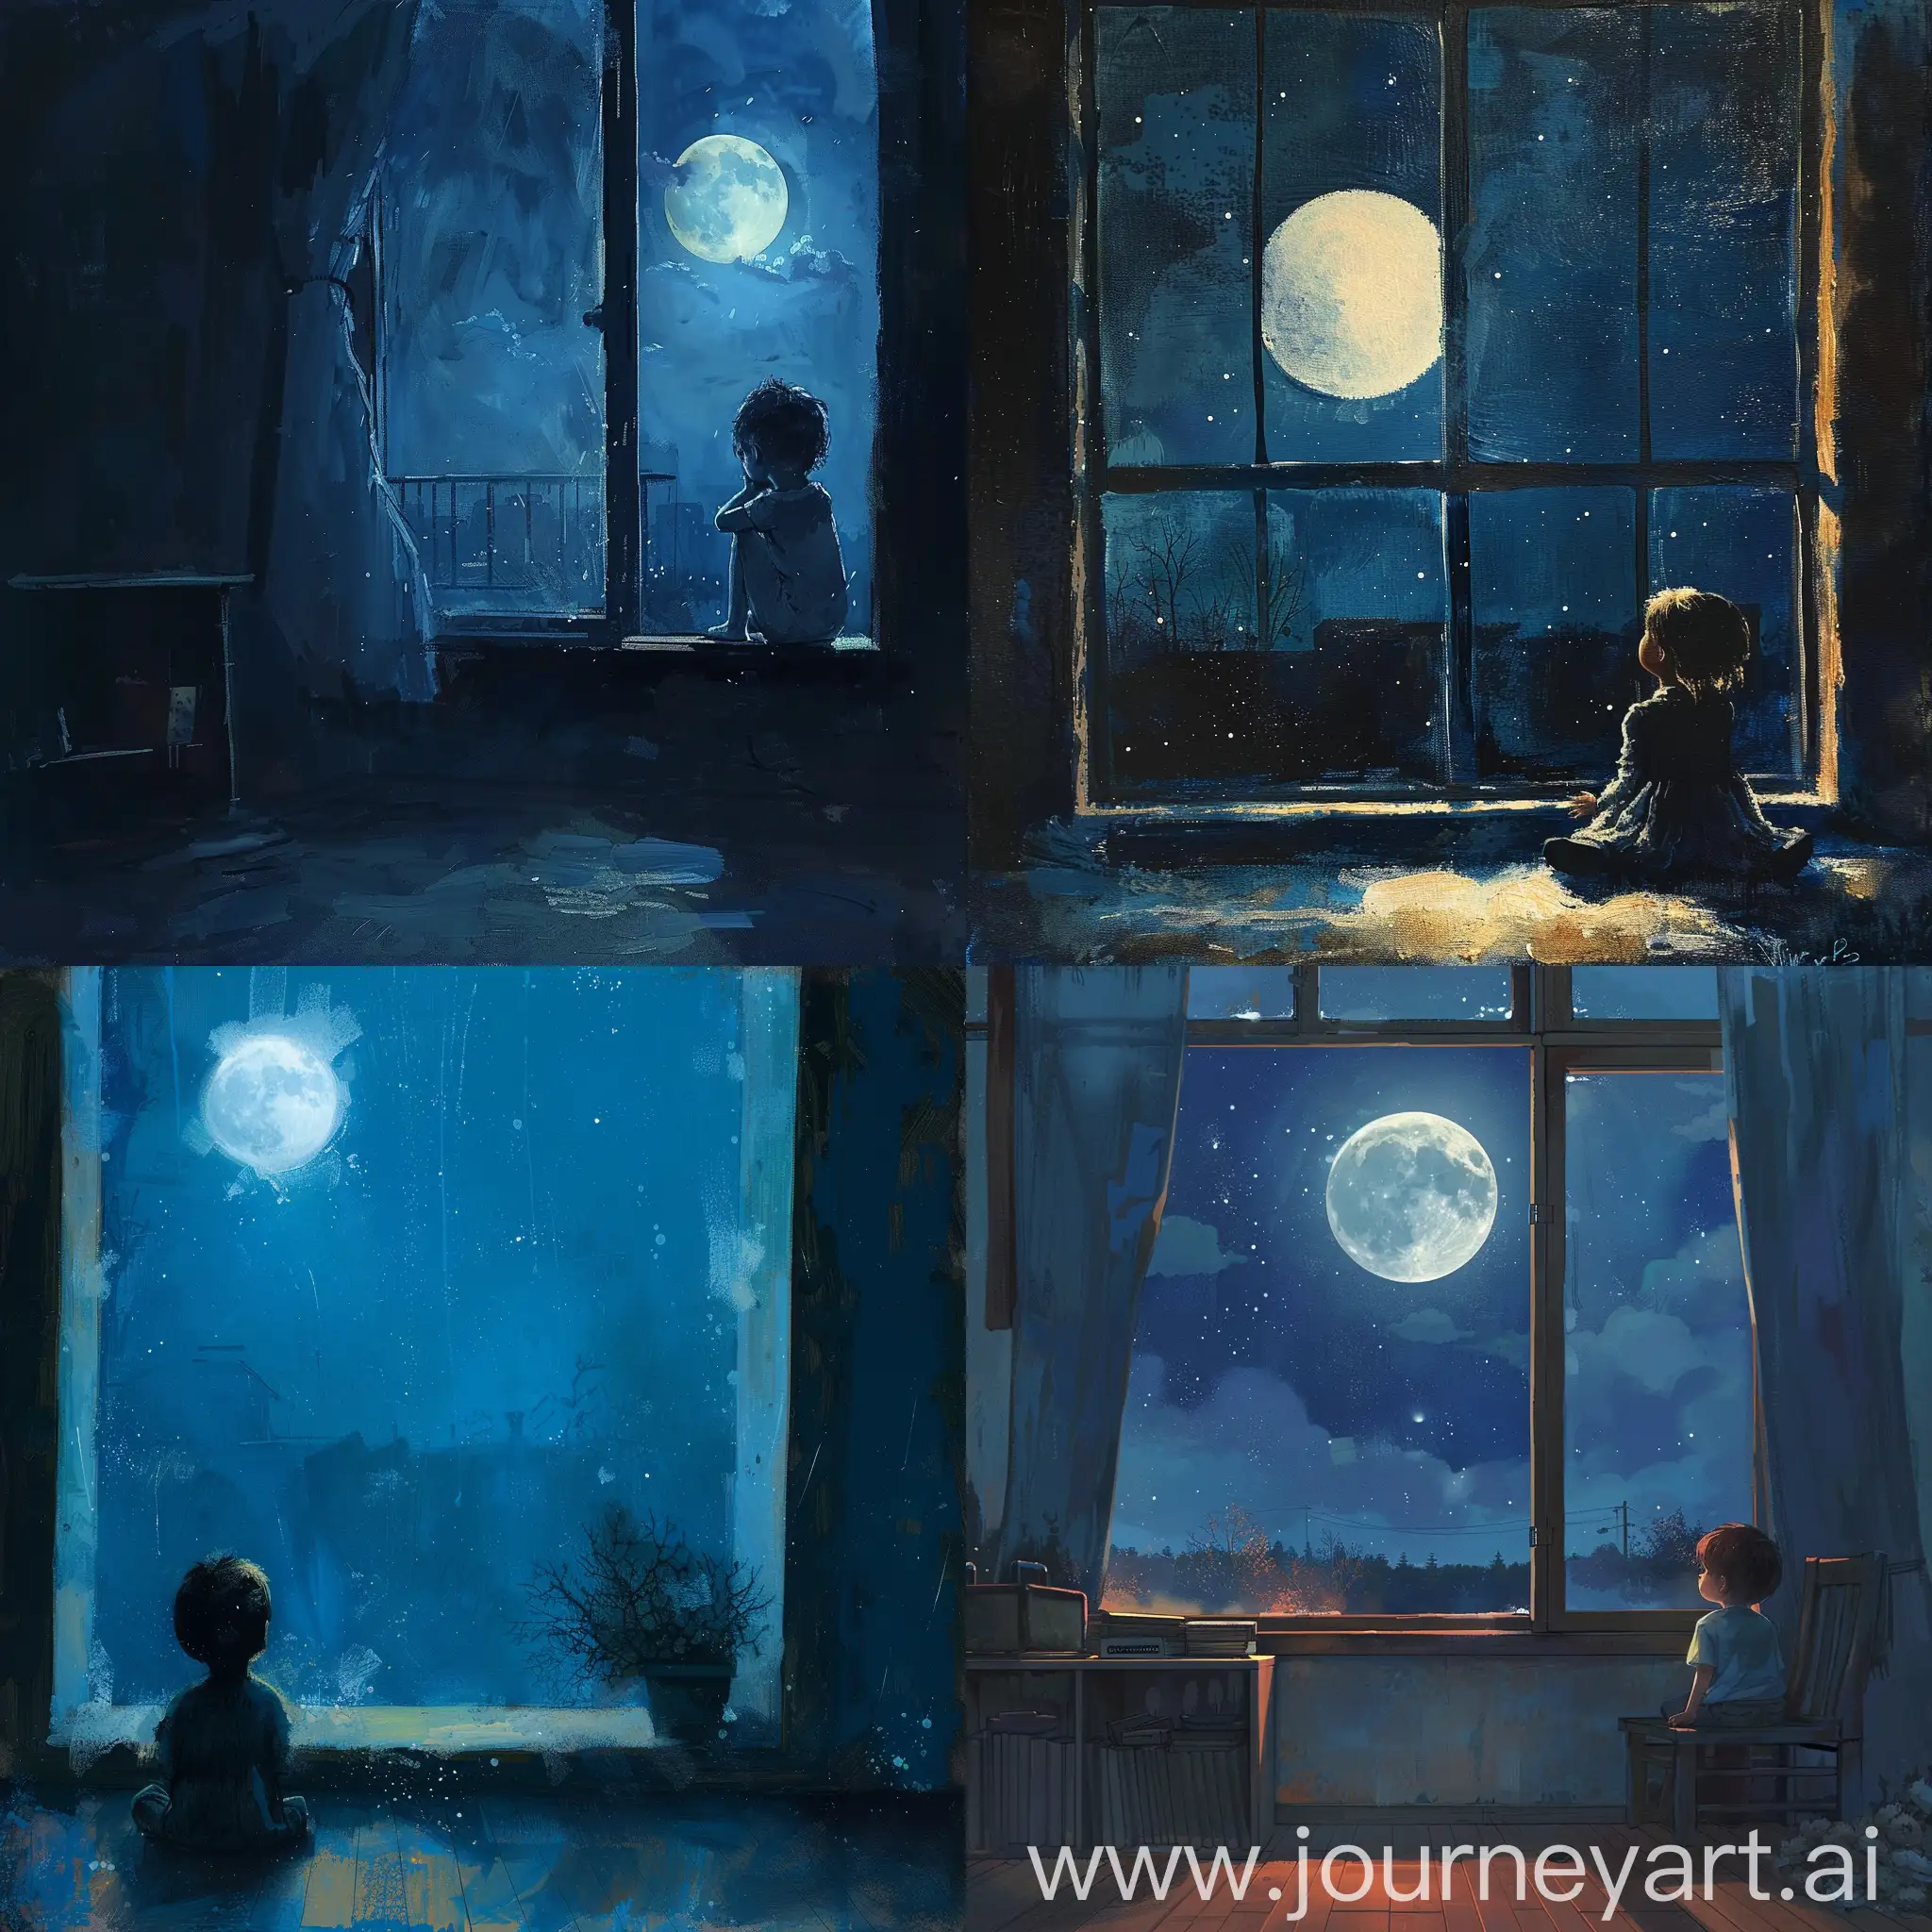 "A child looking at the bright moonlight shining on the floor, thinking it might be frost." "A child raising their head to gaze at the full moon in the night sky." "A child lowering their head, thinking of their distant hometown." "A peaceful night scene with a child by the window, illuminated by moonlight, with a touch of nostalgia."